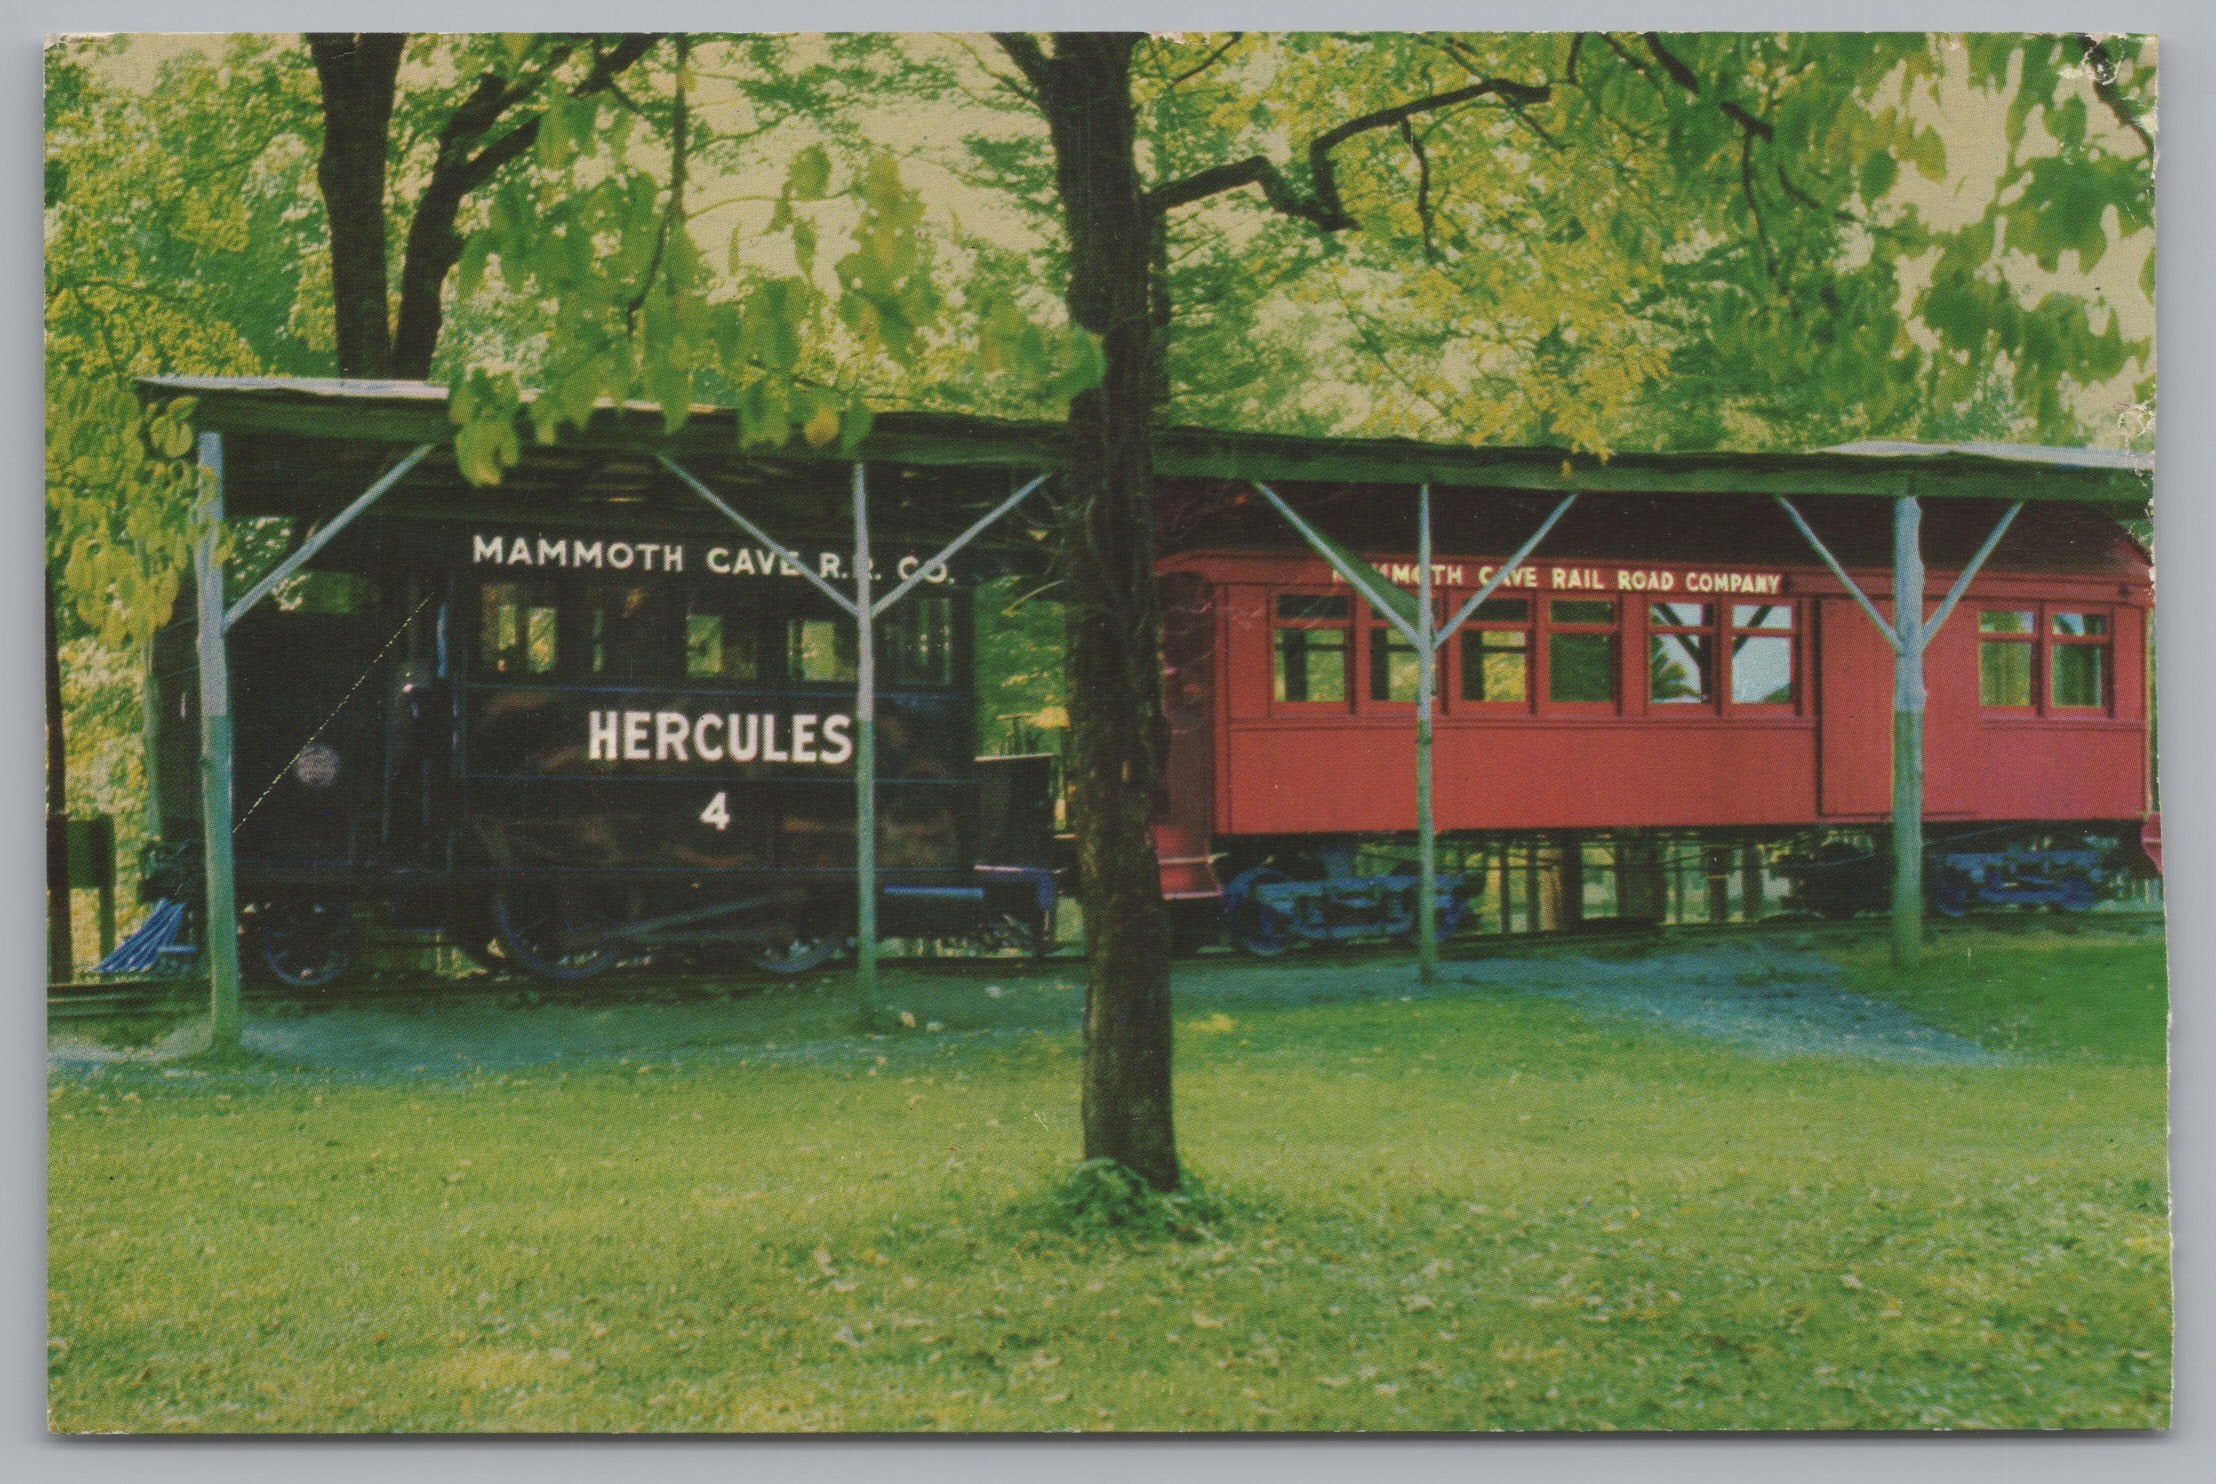 Hercules Mammoth Cave Train, Mammoth Cave National Park, Vintage Post Card.